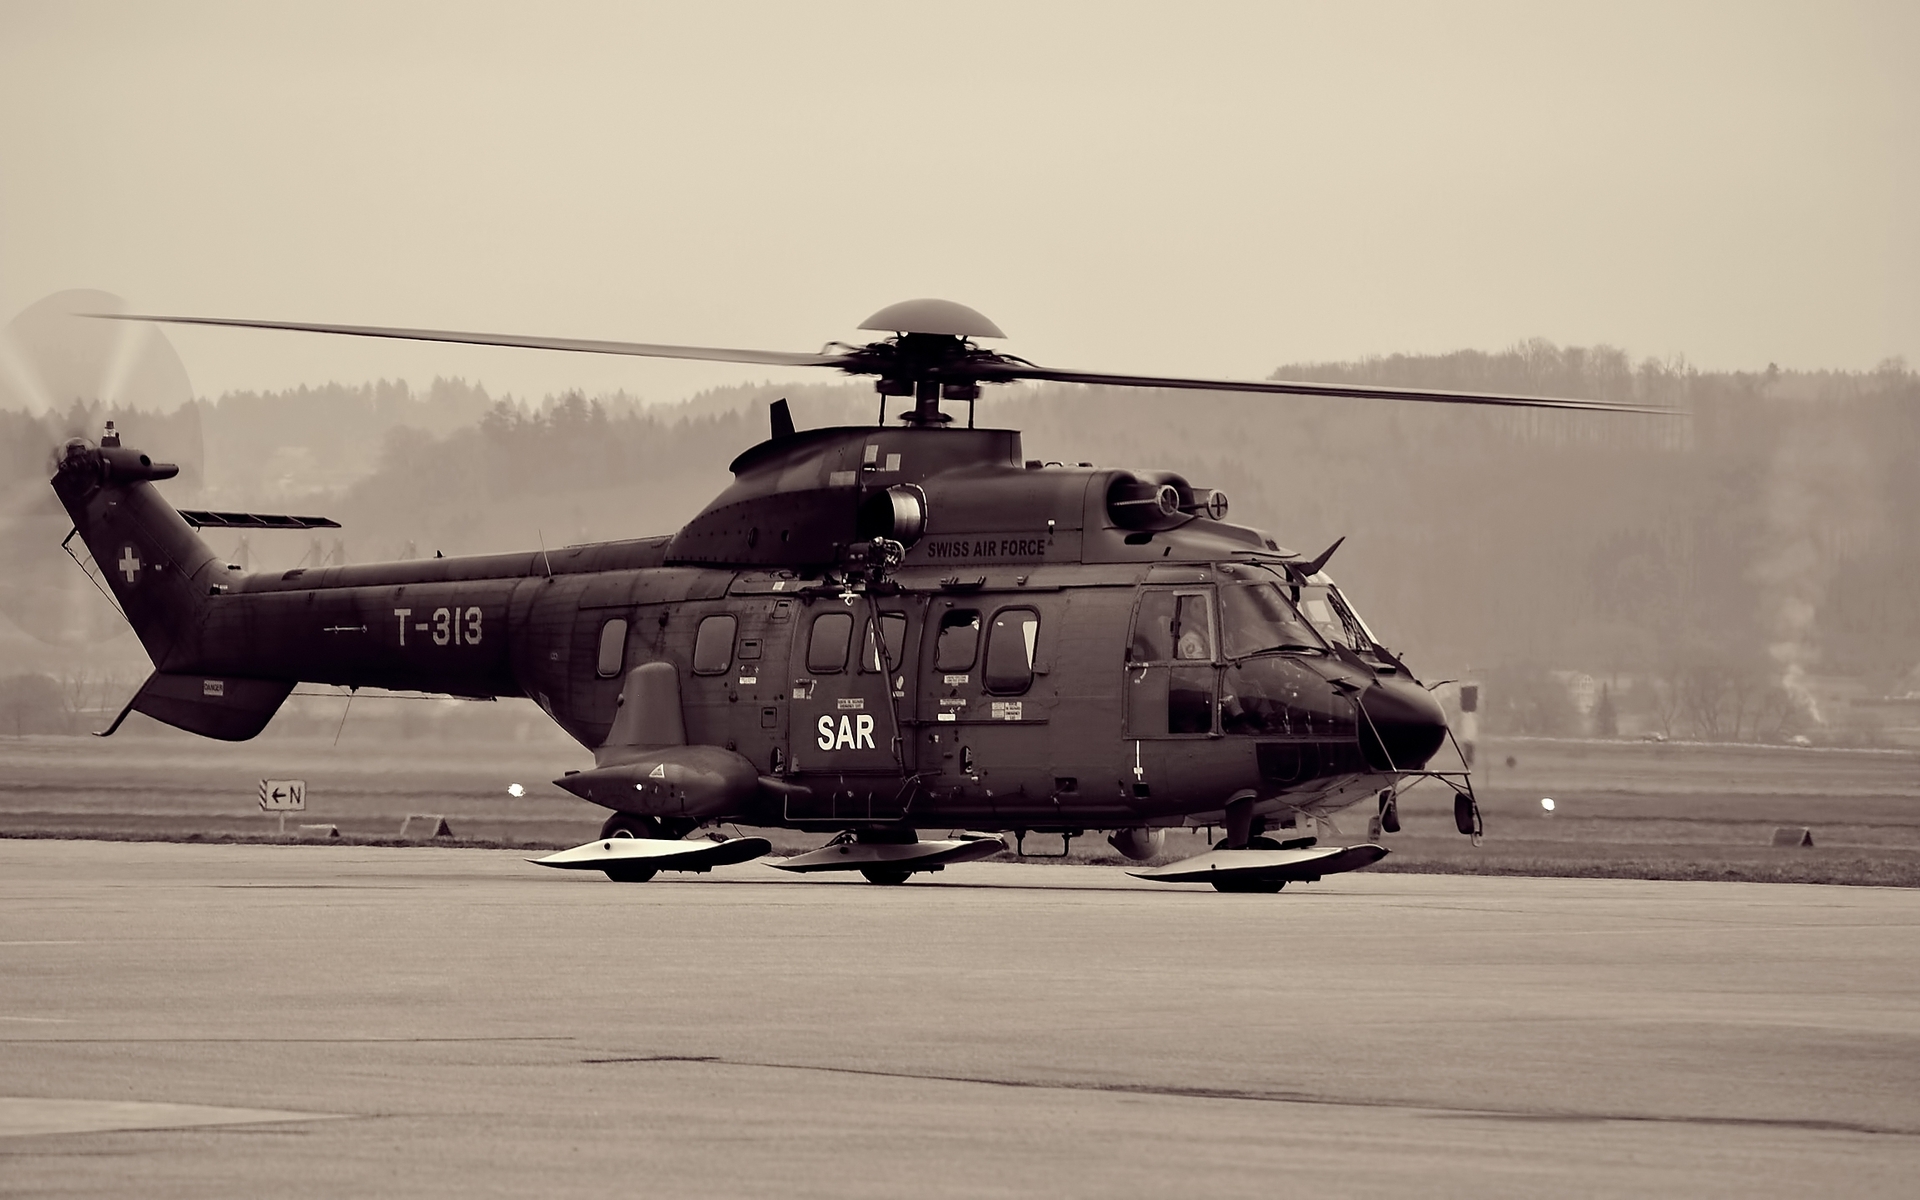 Swiss Air Force Eurocopter AS332 Super Puma helicopter in military action.